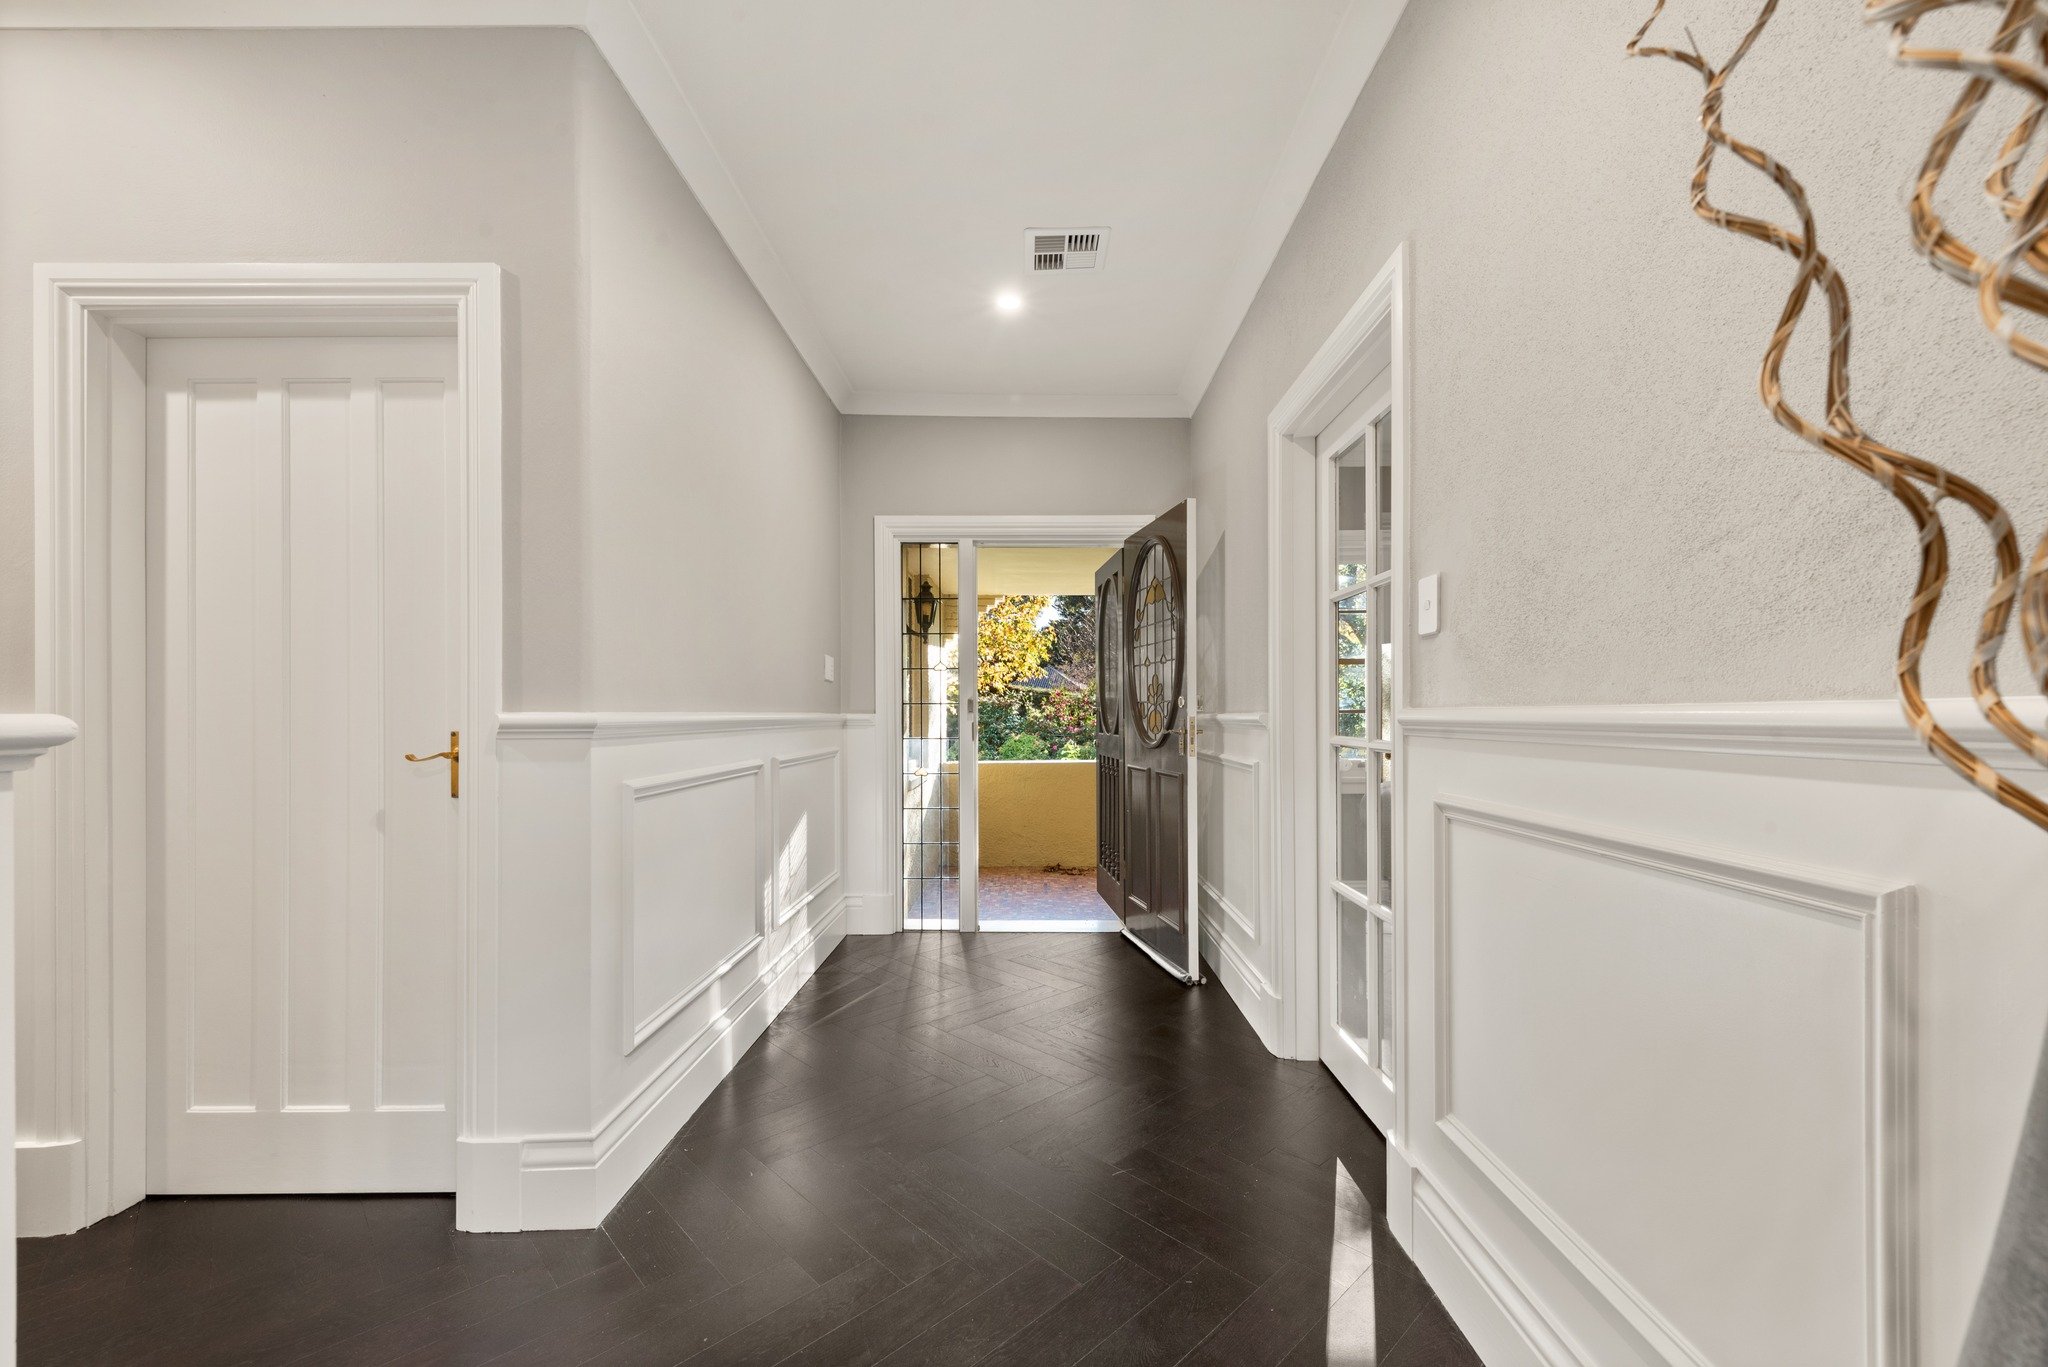 Timeless wainscoting, the perfect blend of craftsmanship and style.